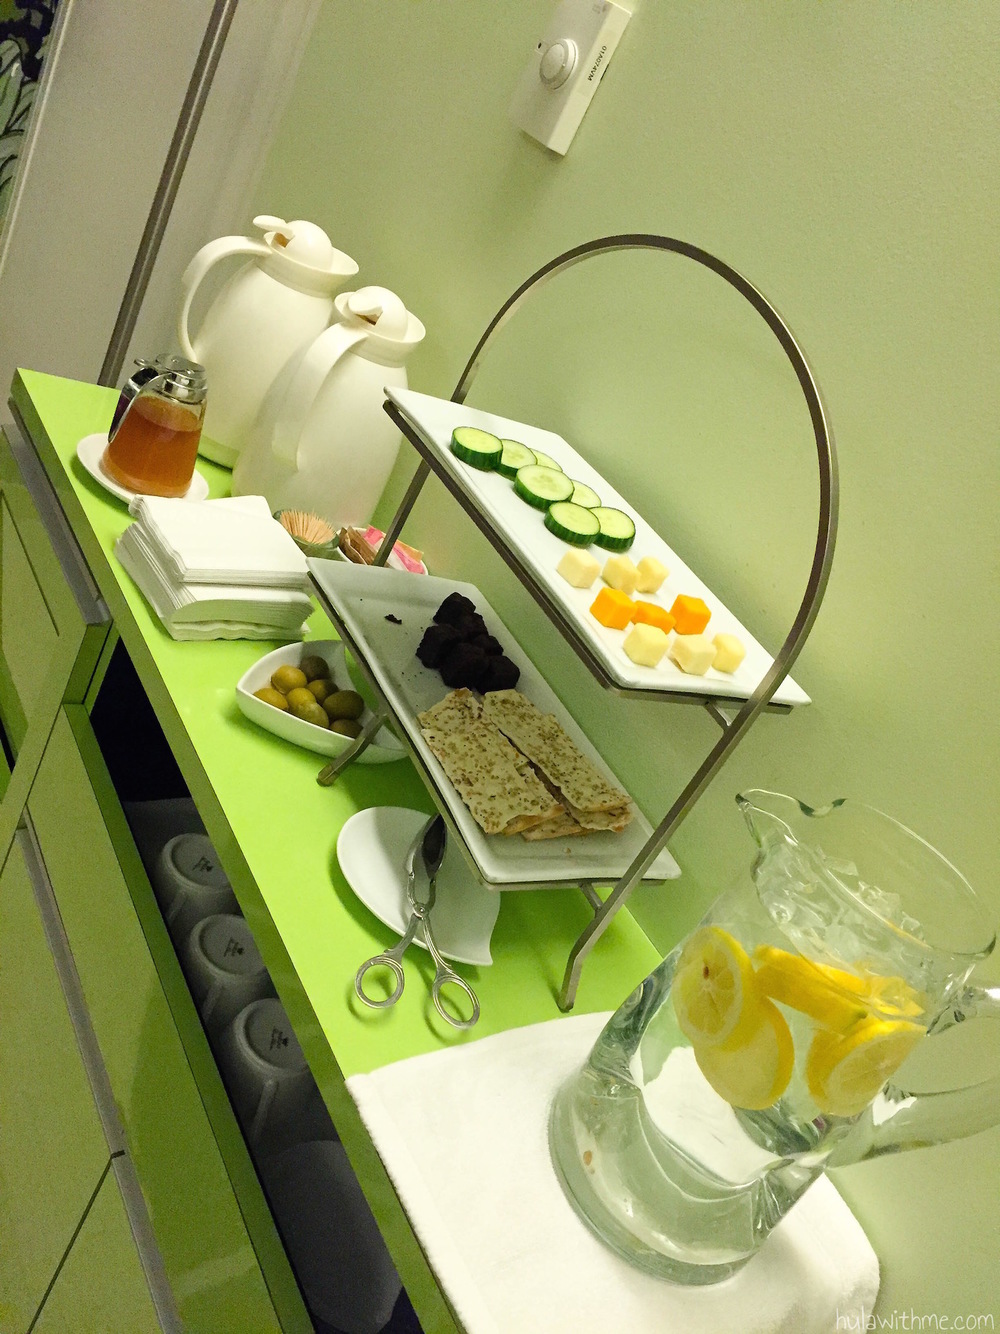 Bliss Spa in Boston, MA: Snacks and drinks served inside the waiting room.